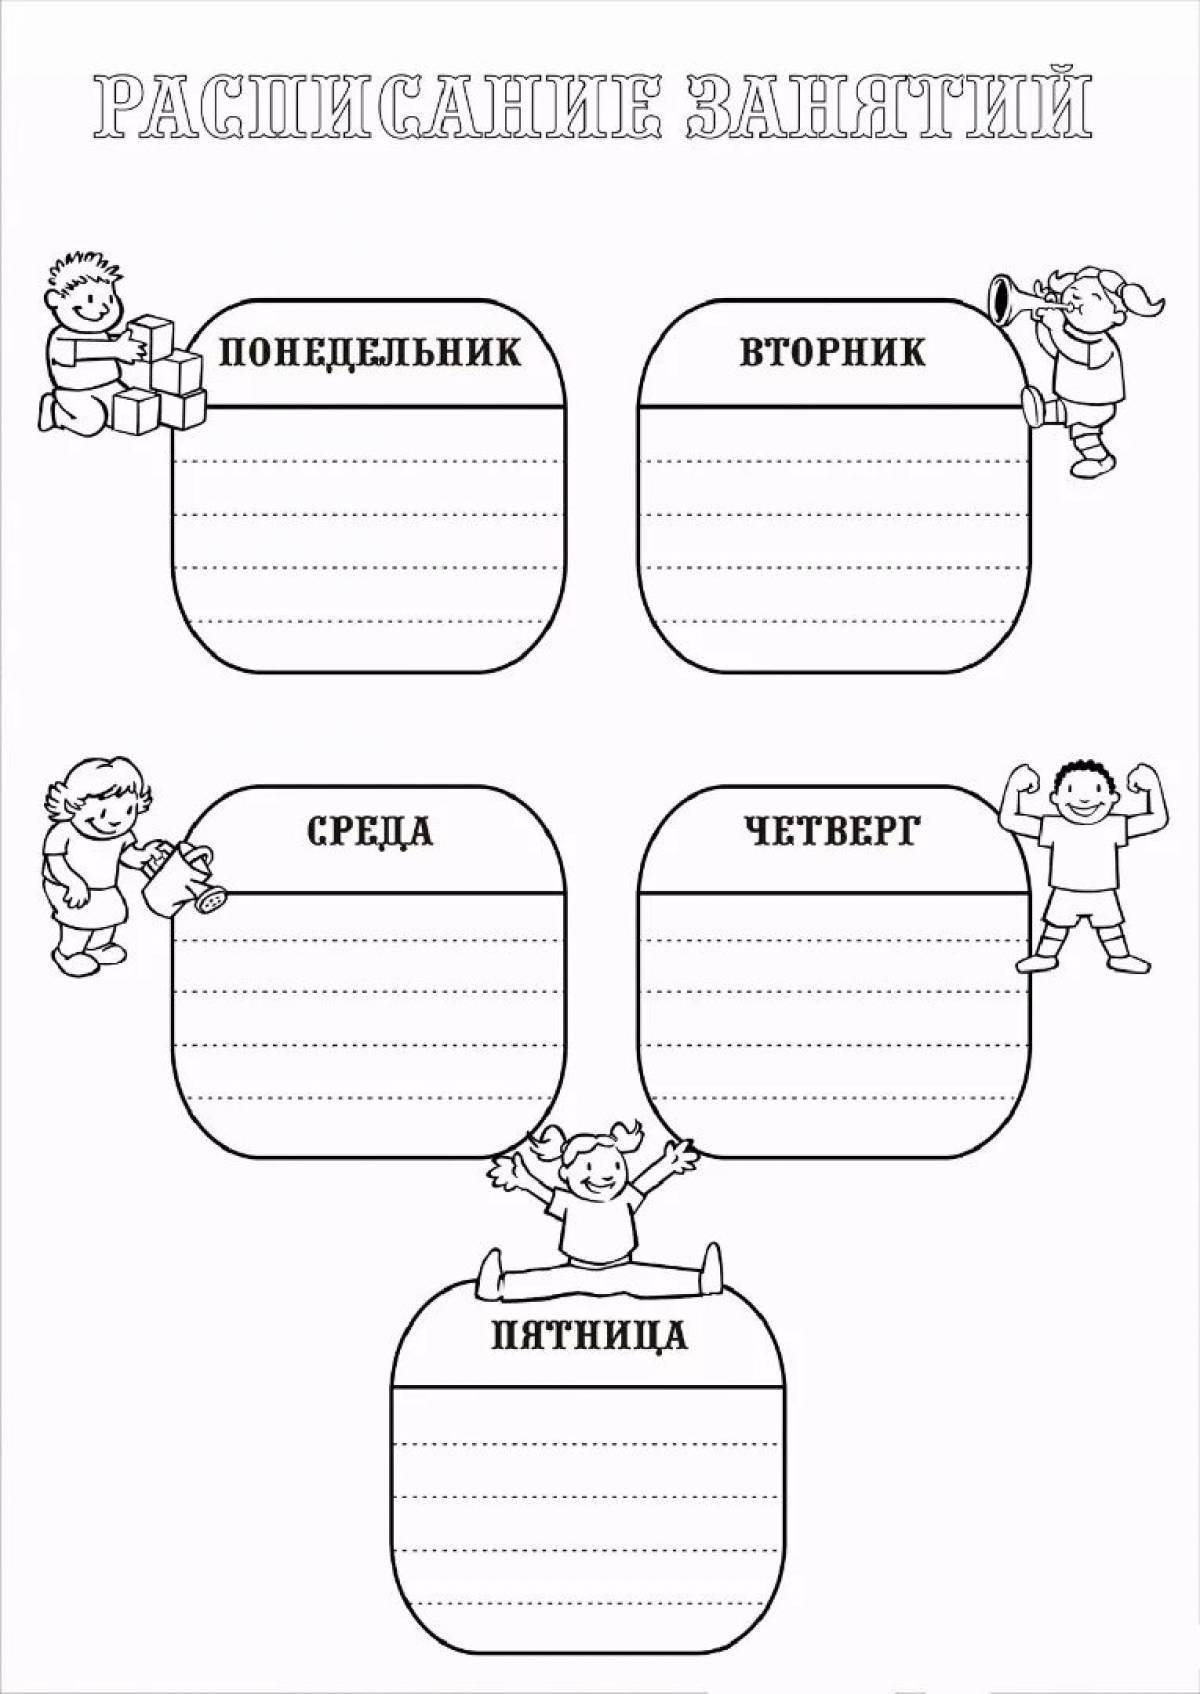 Timetable templates for girls #1